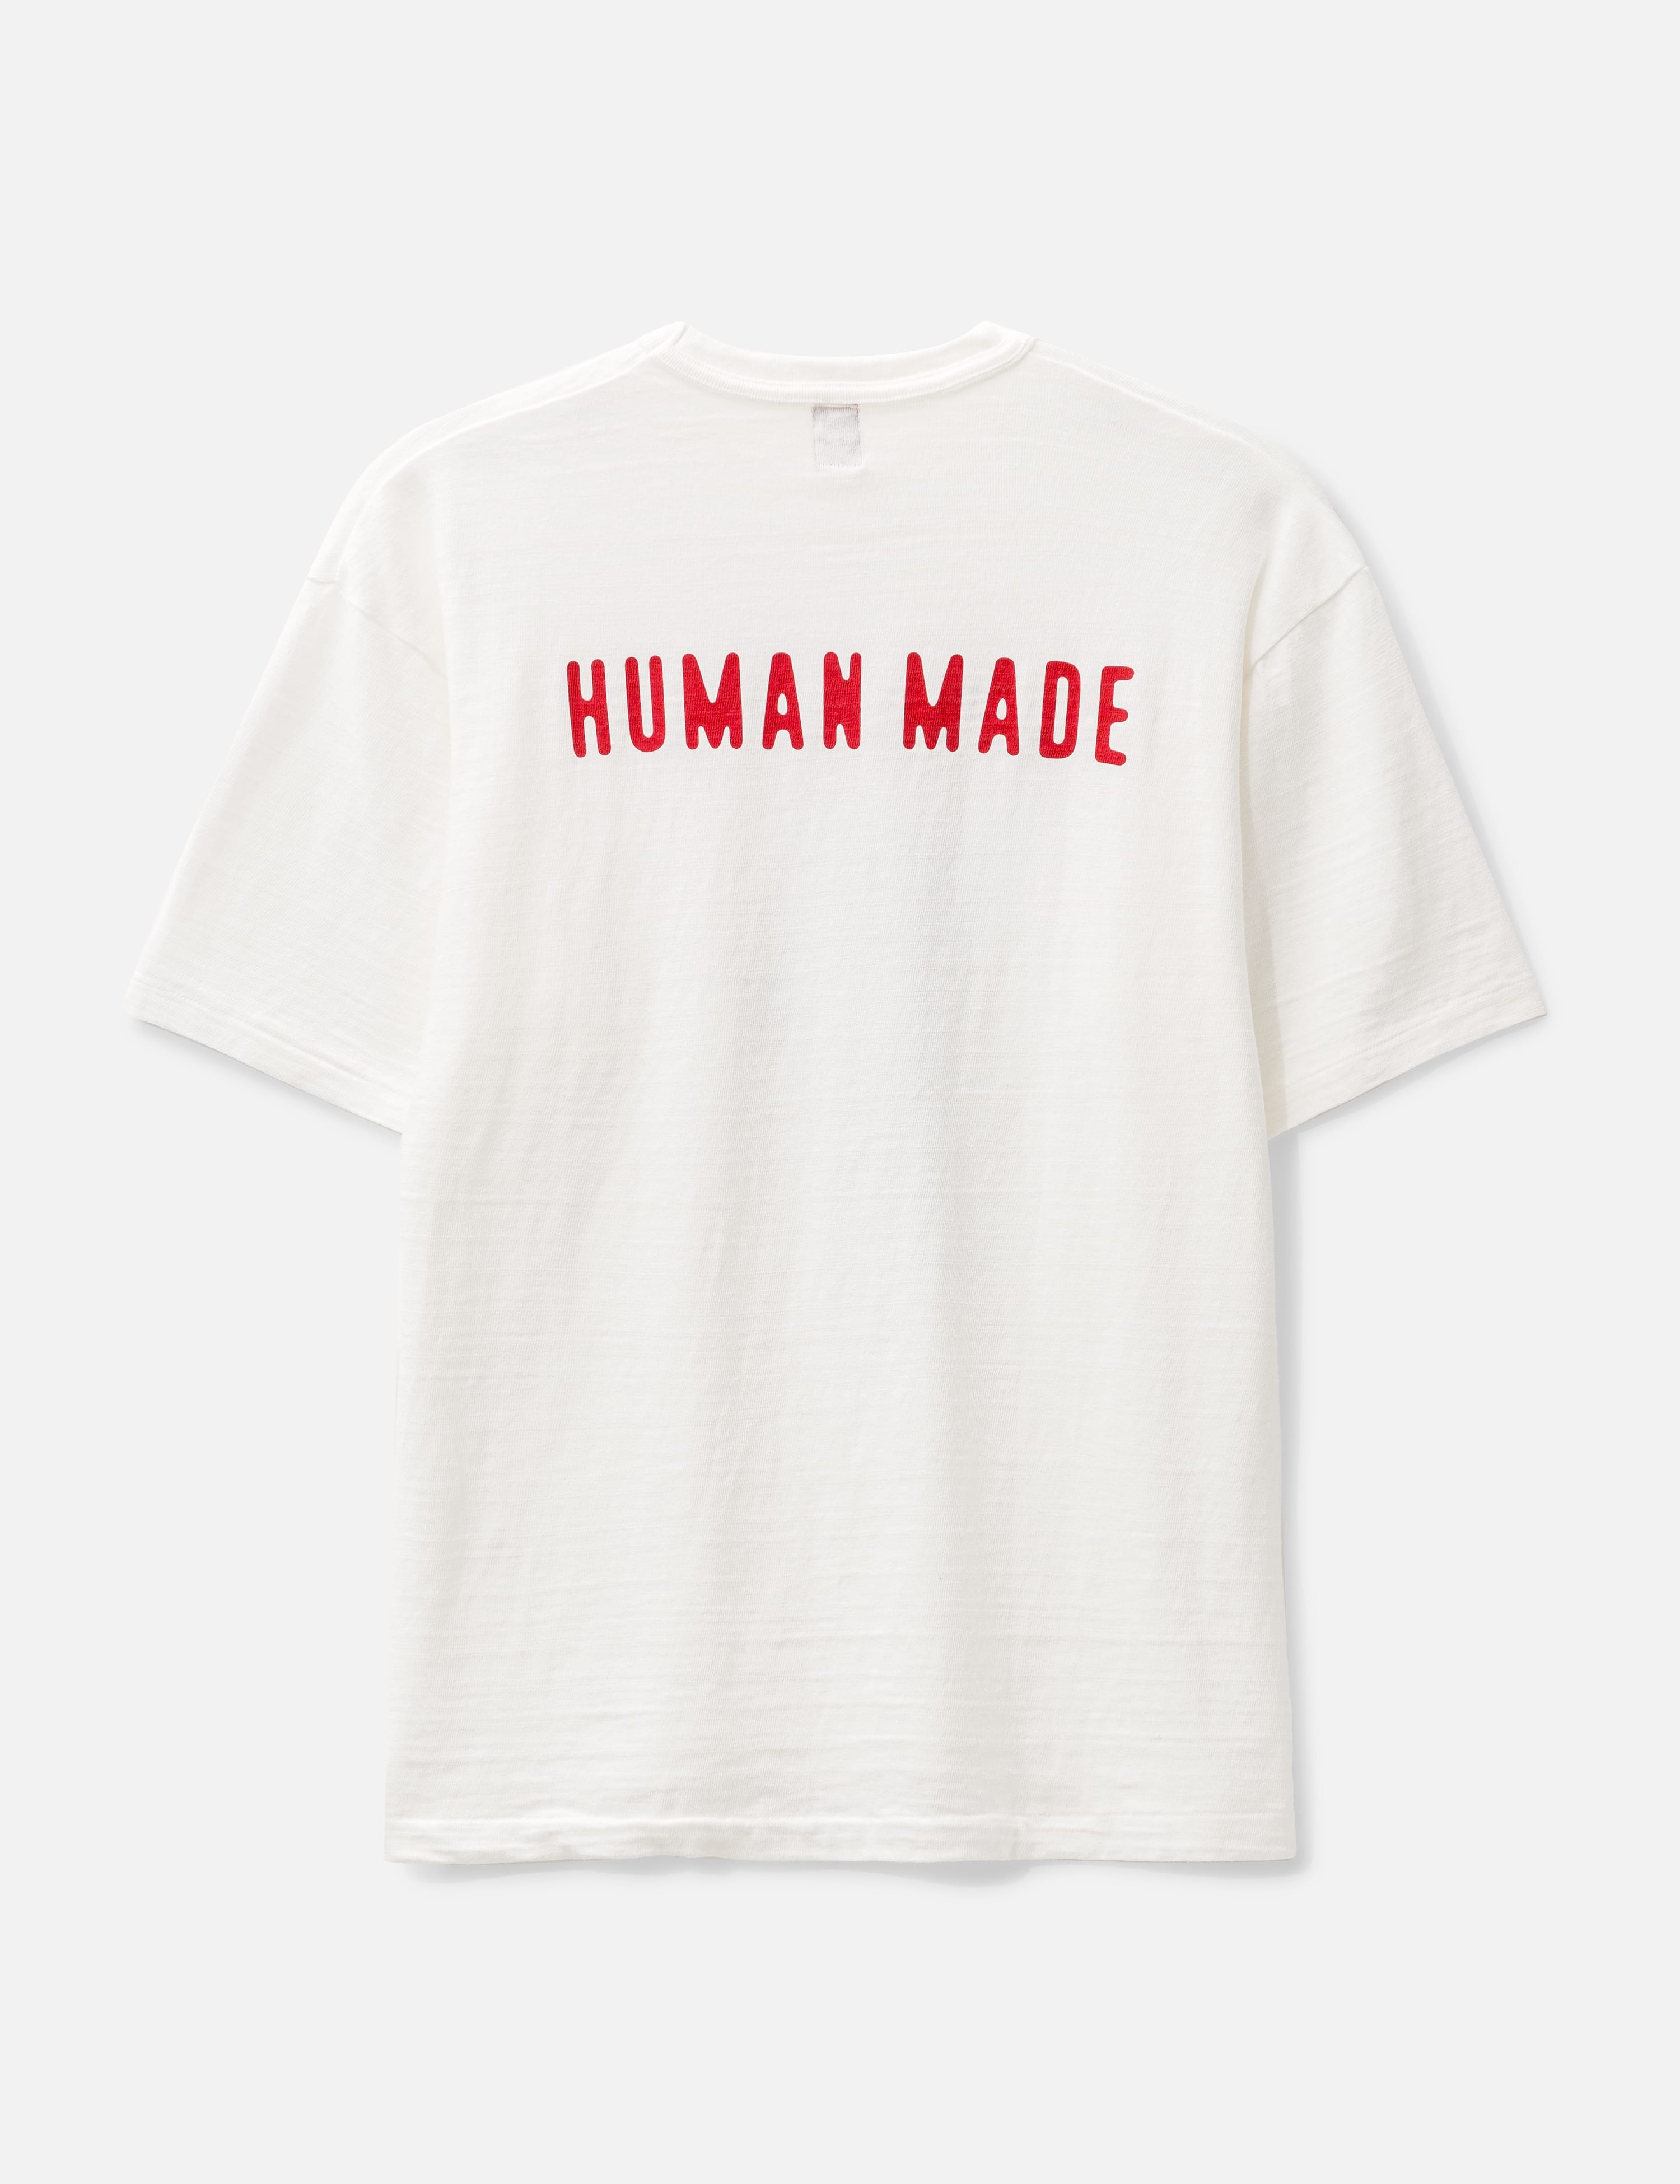 Human Made - GRAPHIC T-SHIRT #1 | HBX - Globally Curated Fashion